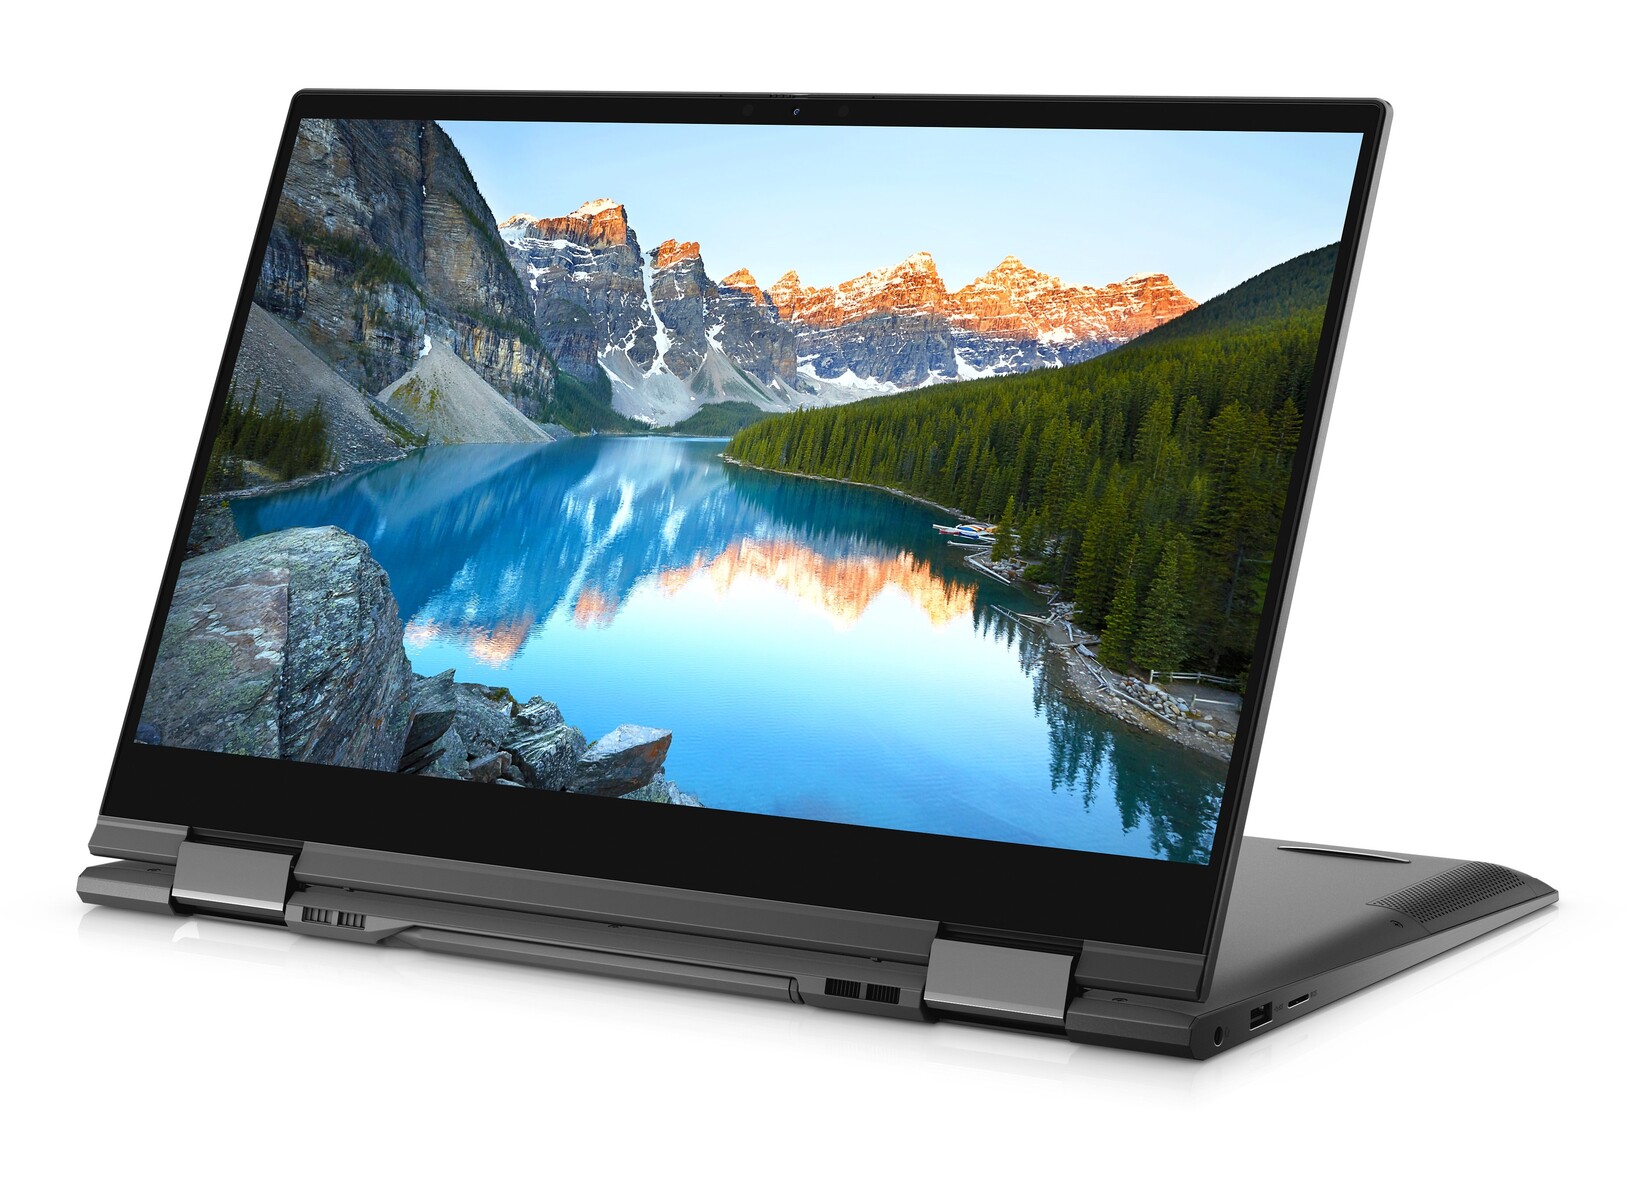  Dell Inspiron 17 7000 Notebook